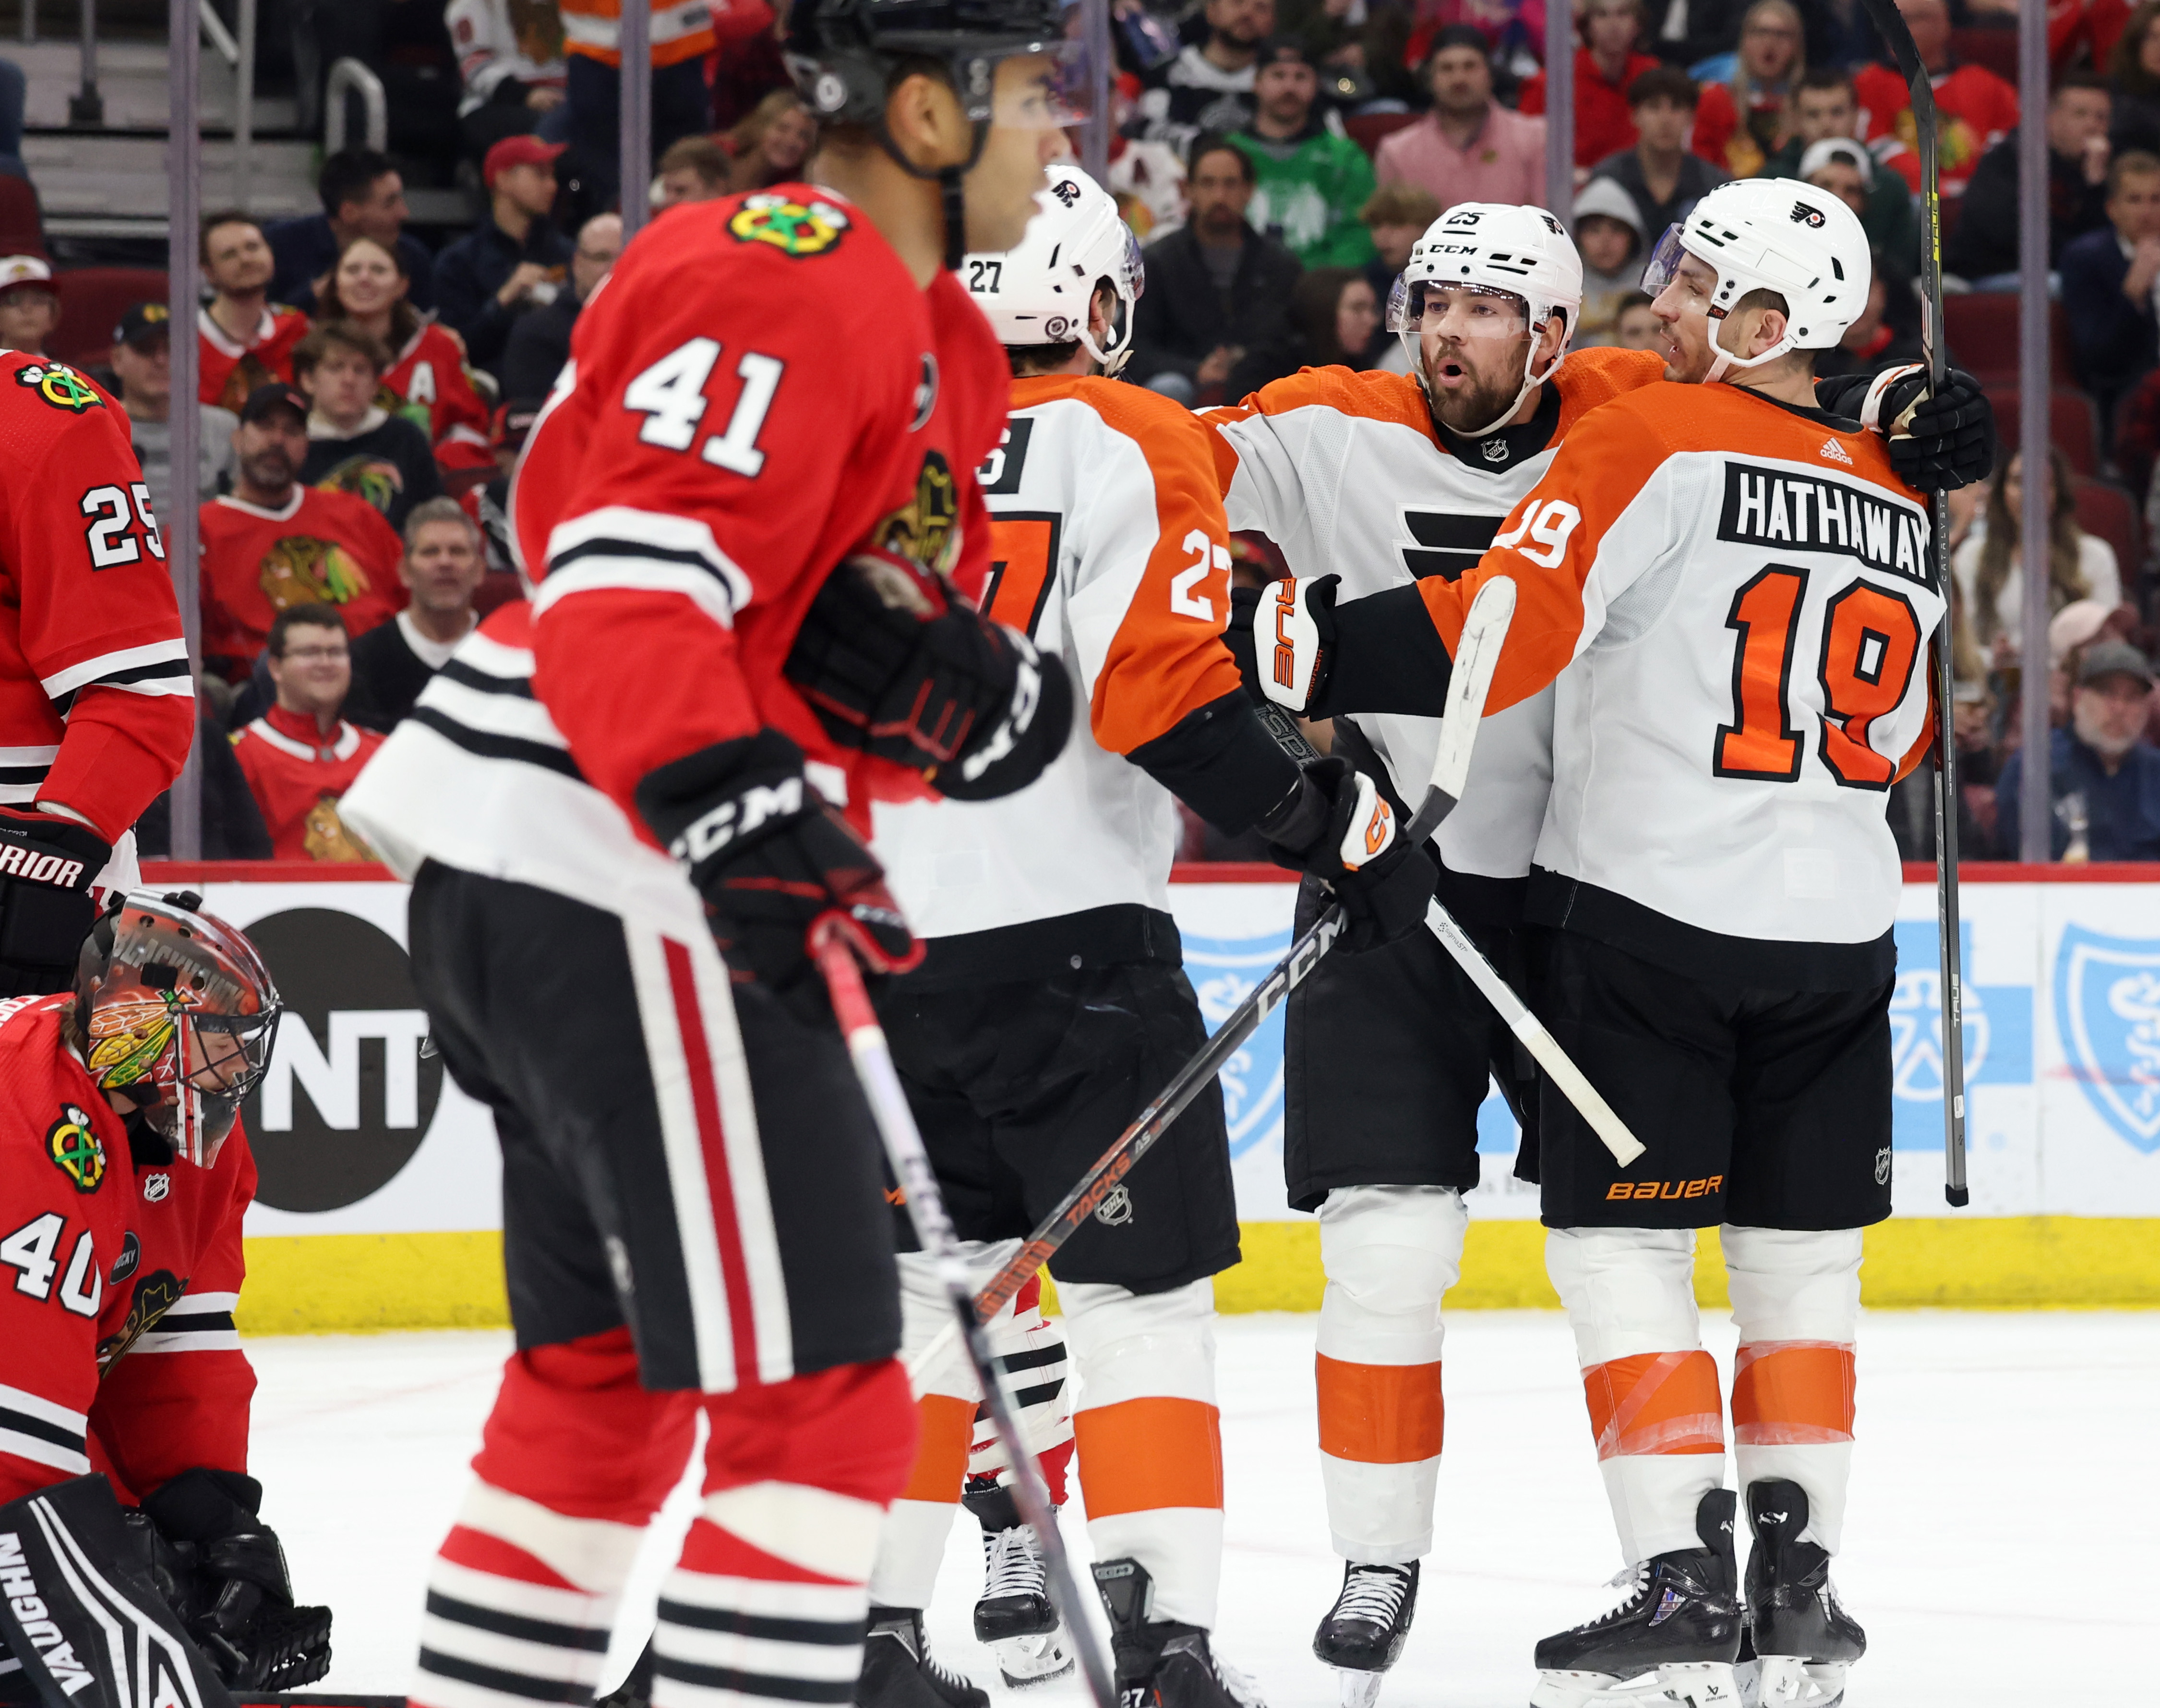 Flyers right wing Garnet Hathaway (19) and her teammates celebrate after Hathaway scored in the second period against the Blackhawks at the United Center on February 21, 2024 in Chicago.  (John J. Kim/Chicago Tribune)